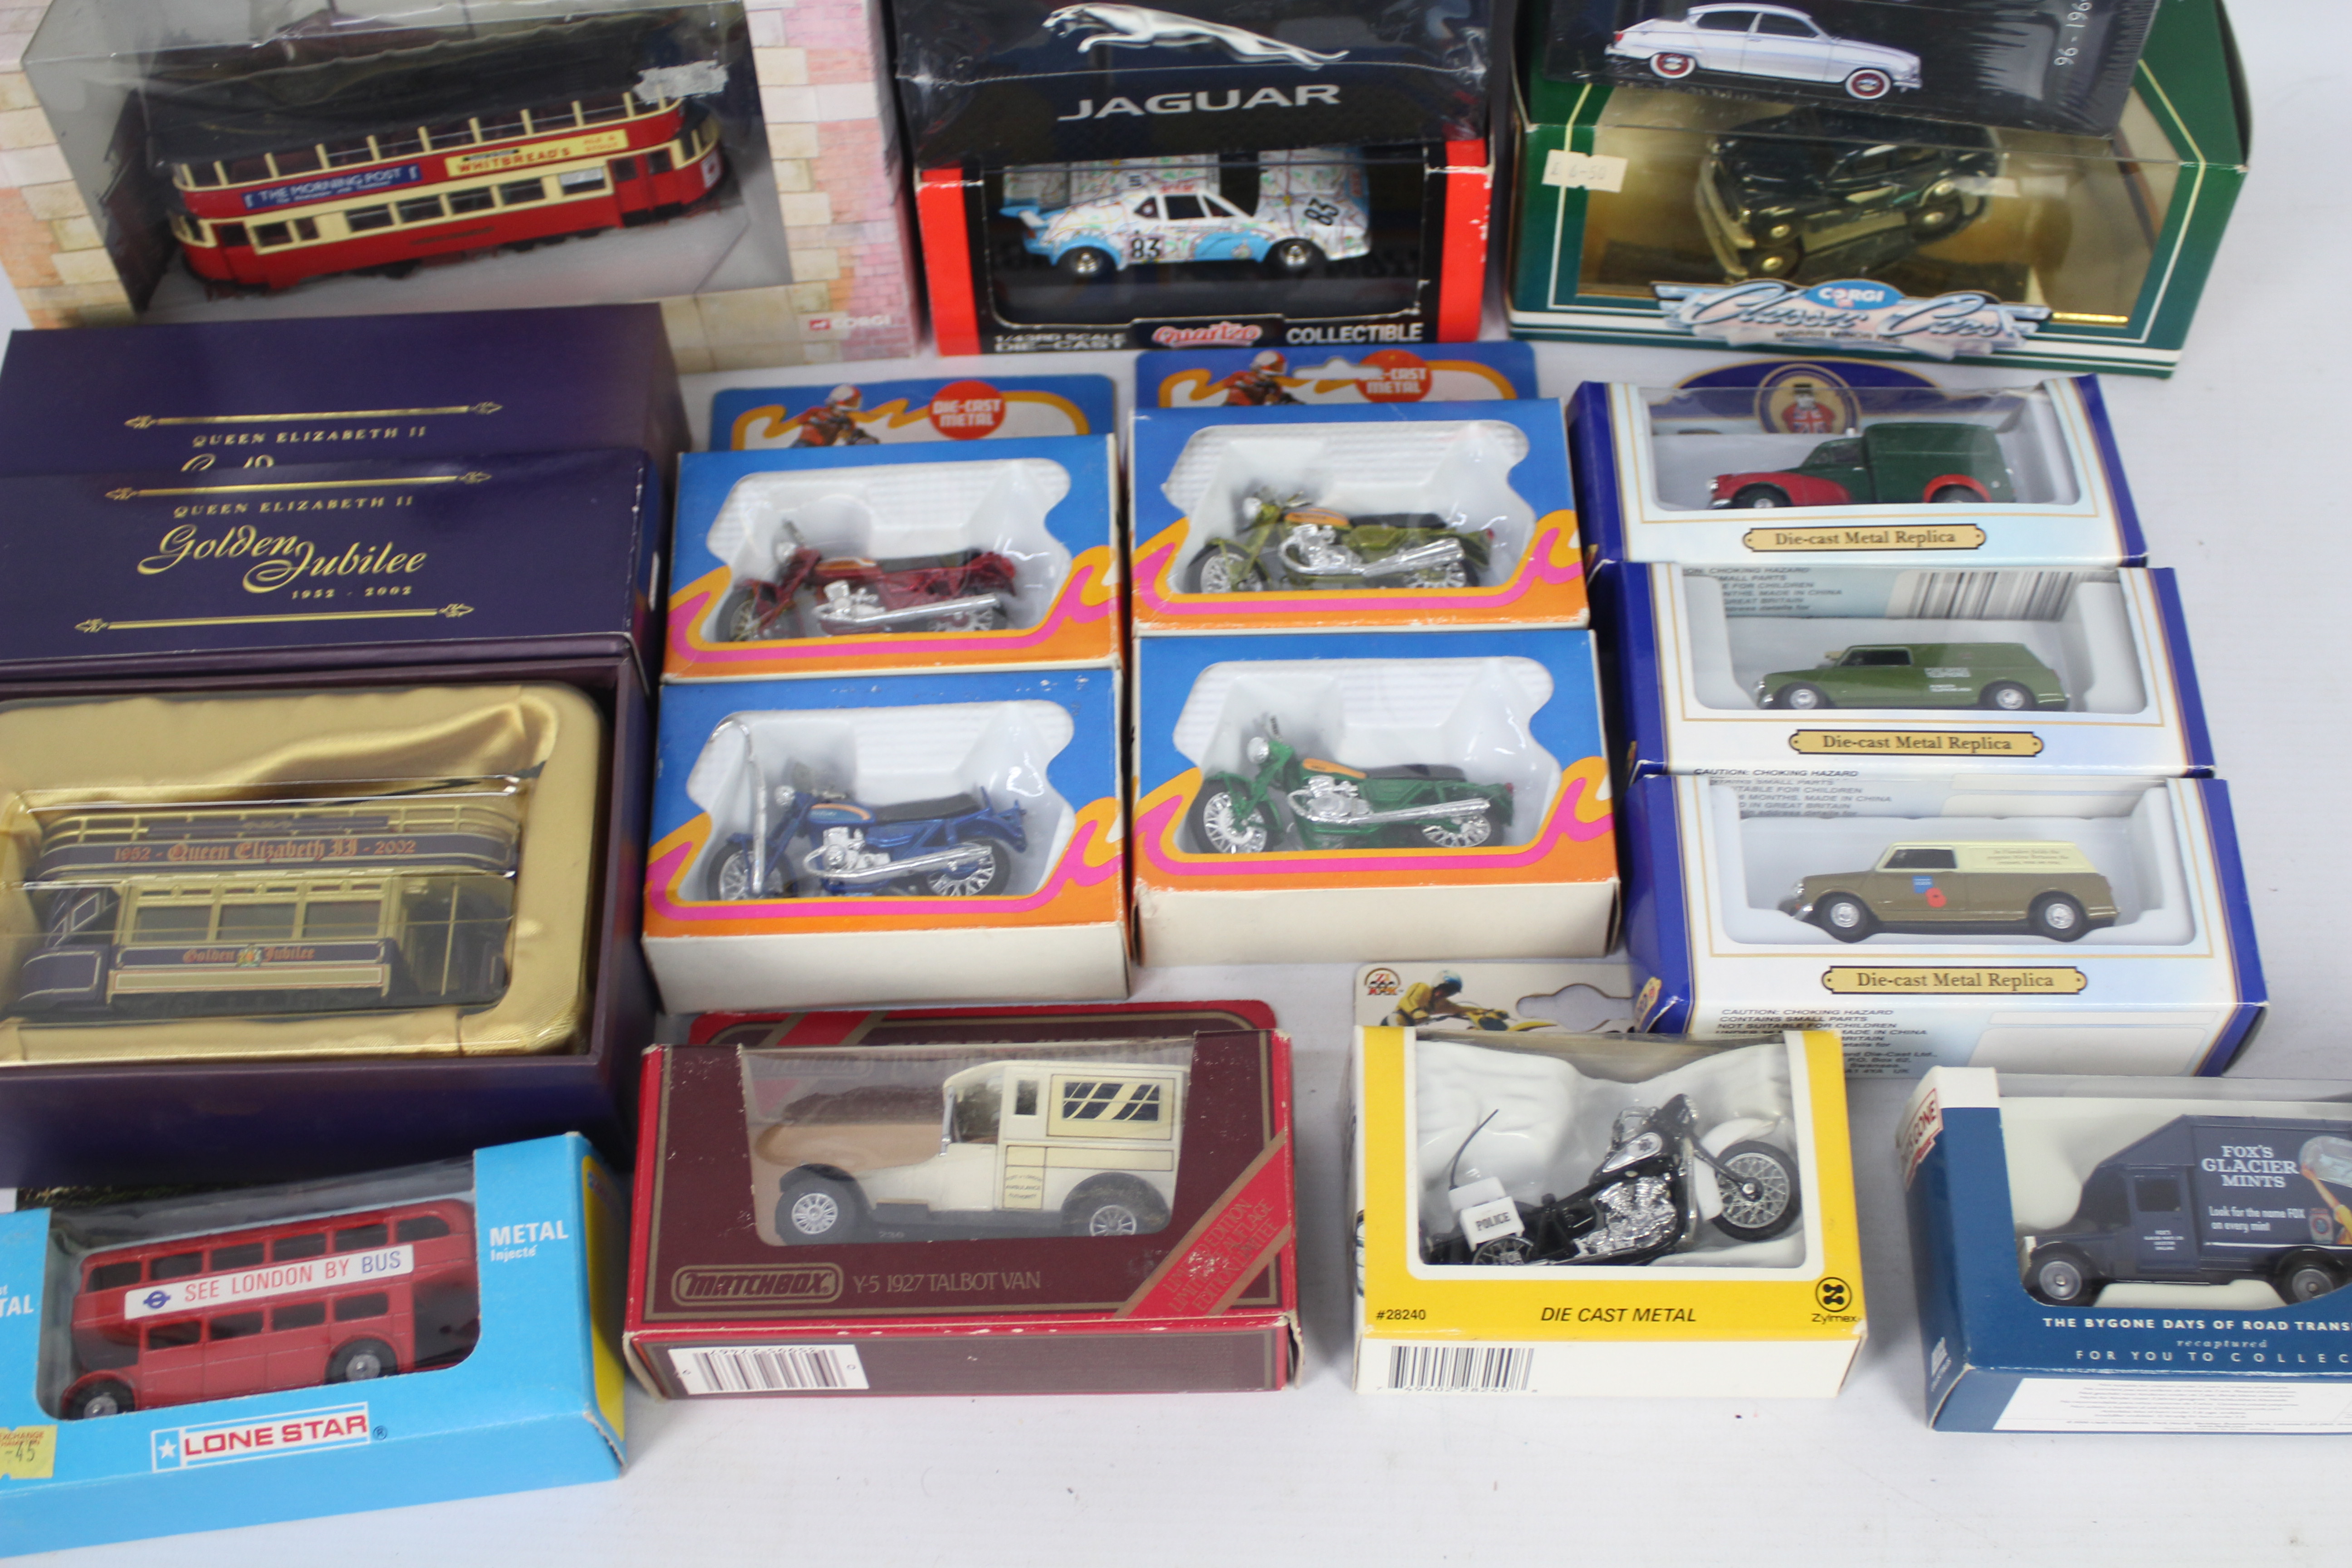 Atlas Editions, Lone Star, Zylemex, Corgi, Other - A boxed collection of diecast in various scales. - Image 3 of 3